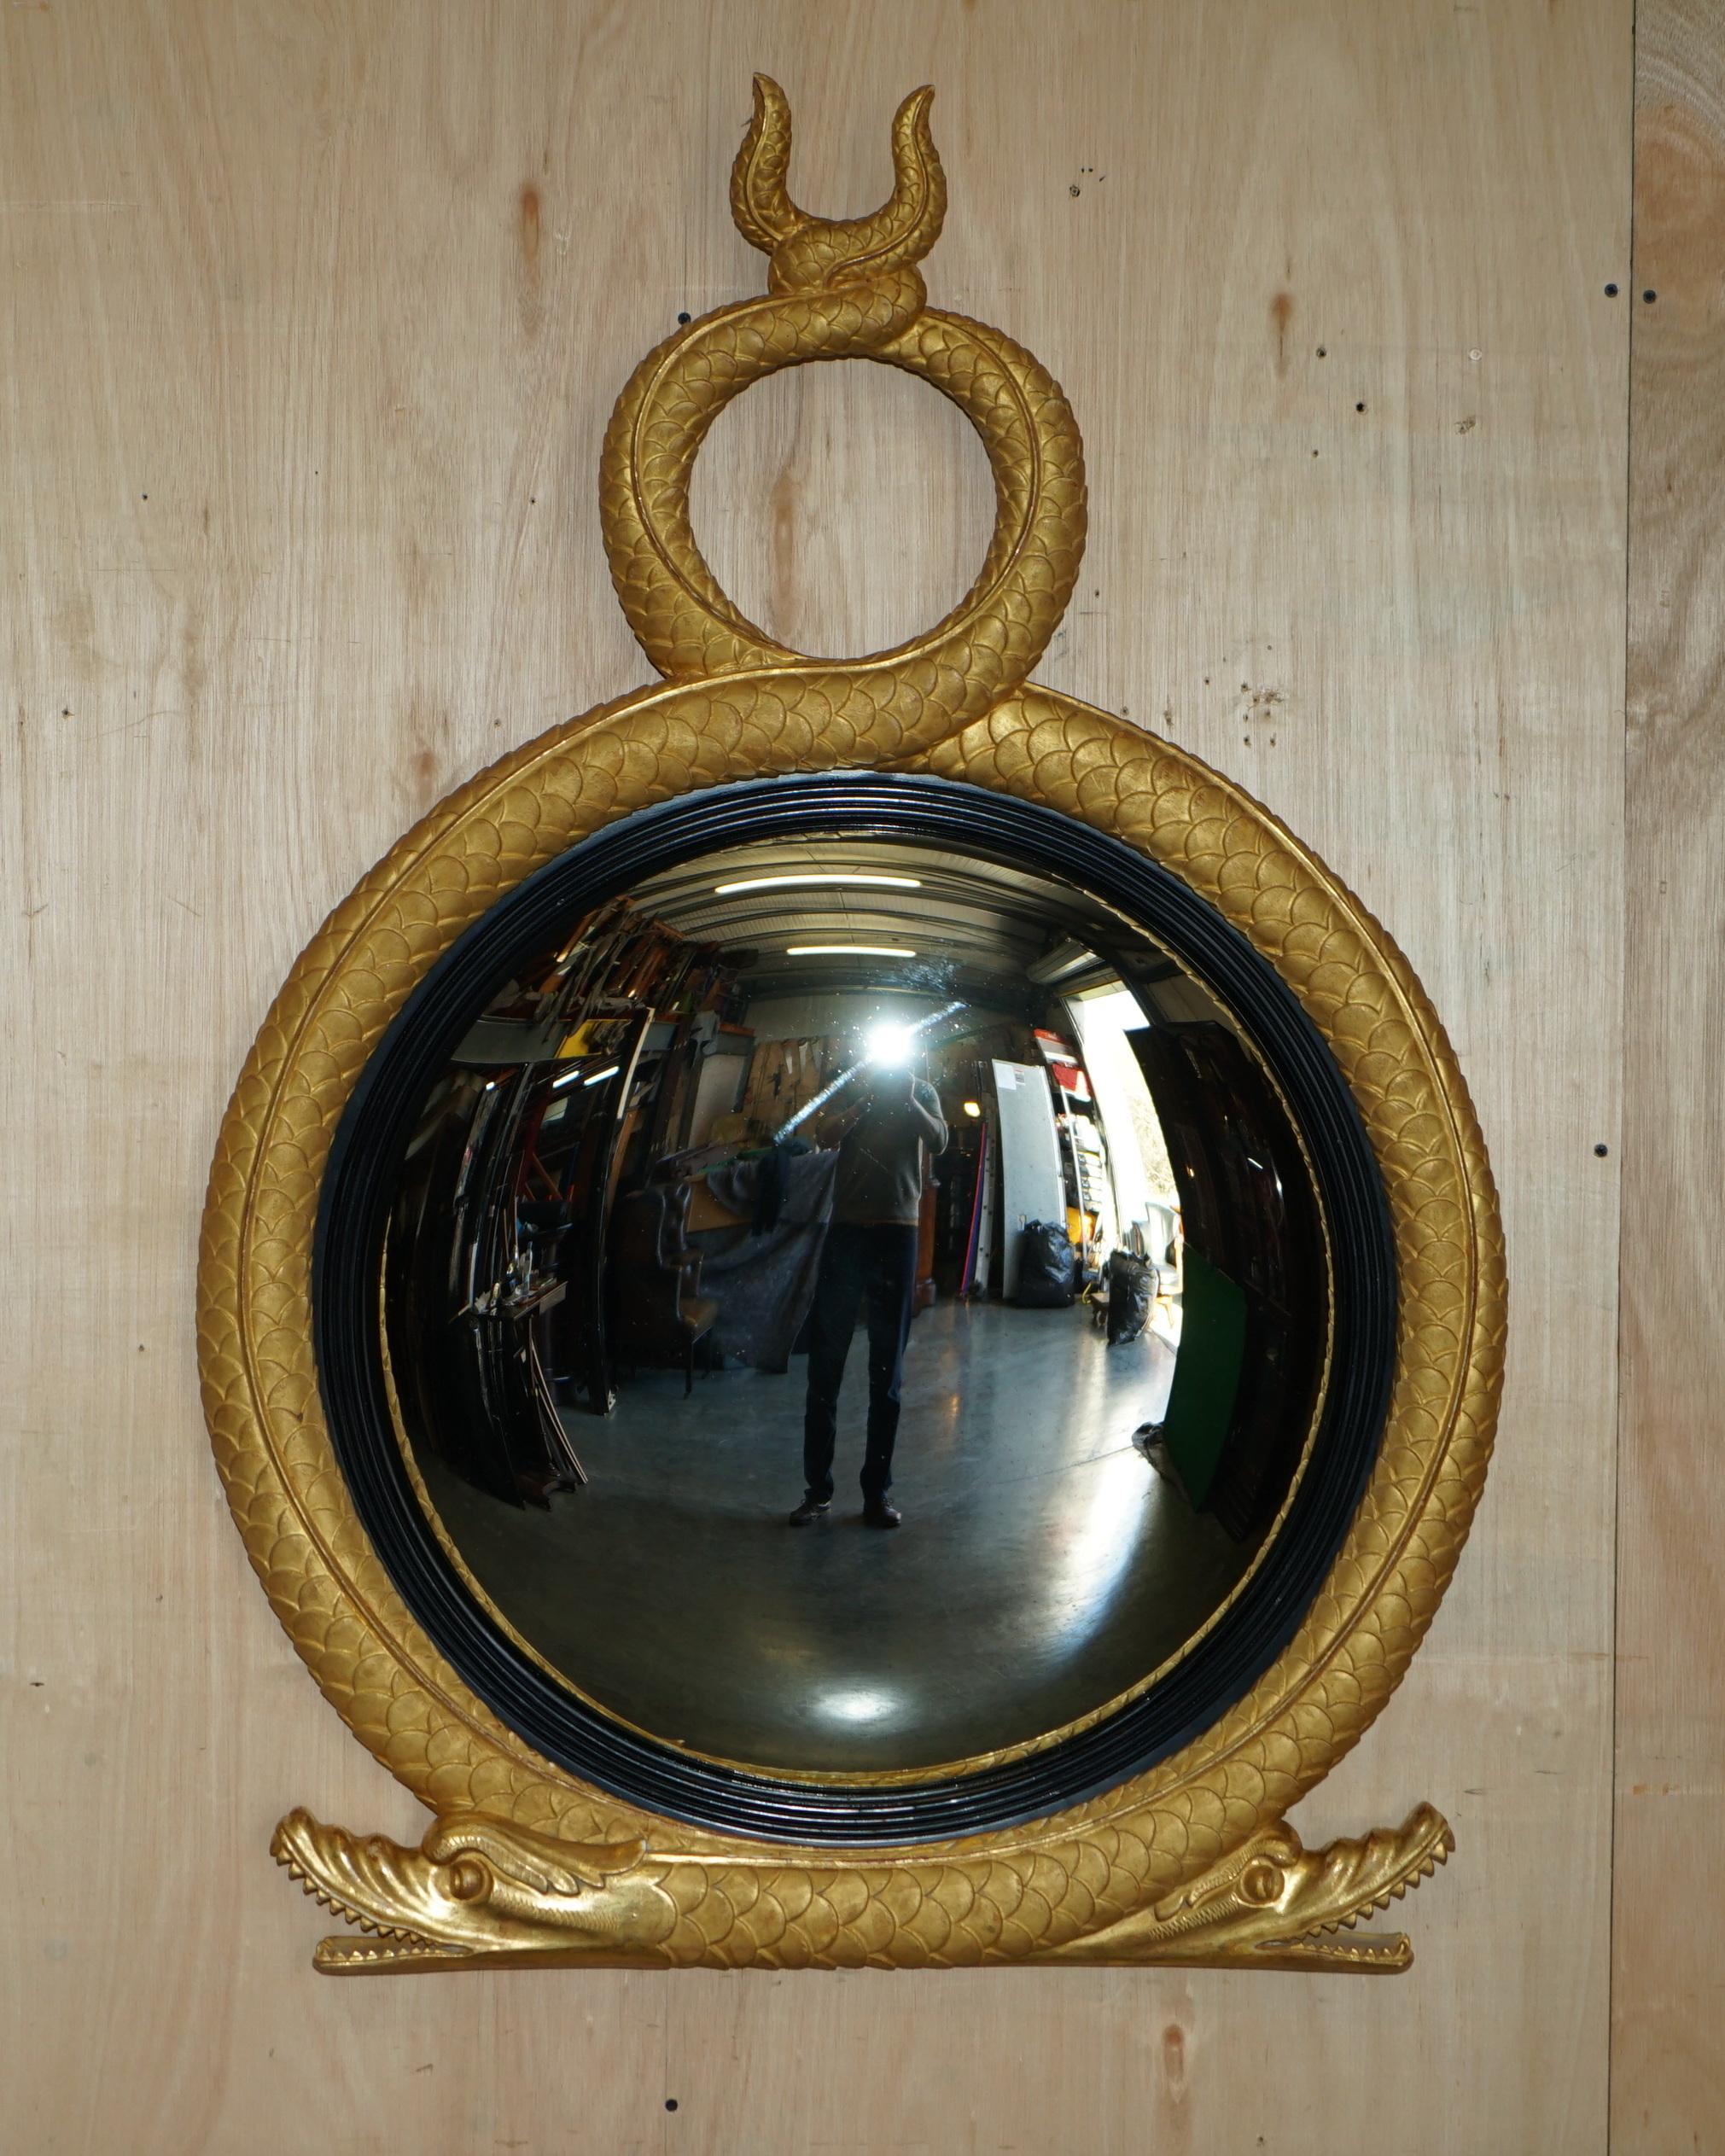 PAIR OF EXTRA LARGE STUNNING REGENCY STYLE GOLD GILT TWIN SERPENT CONVEX MiRRORS For Sale 9